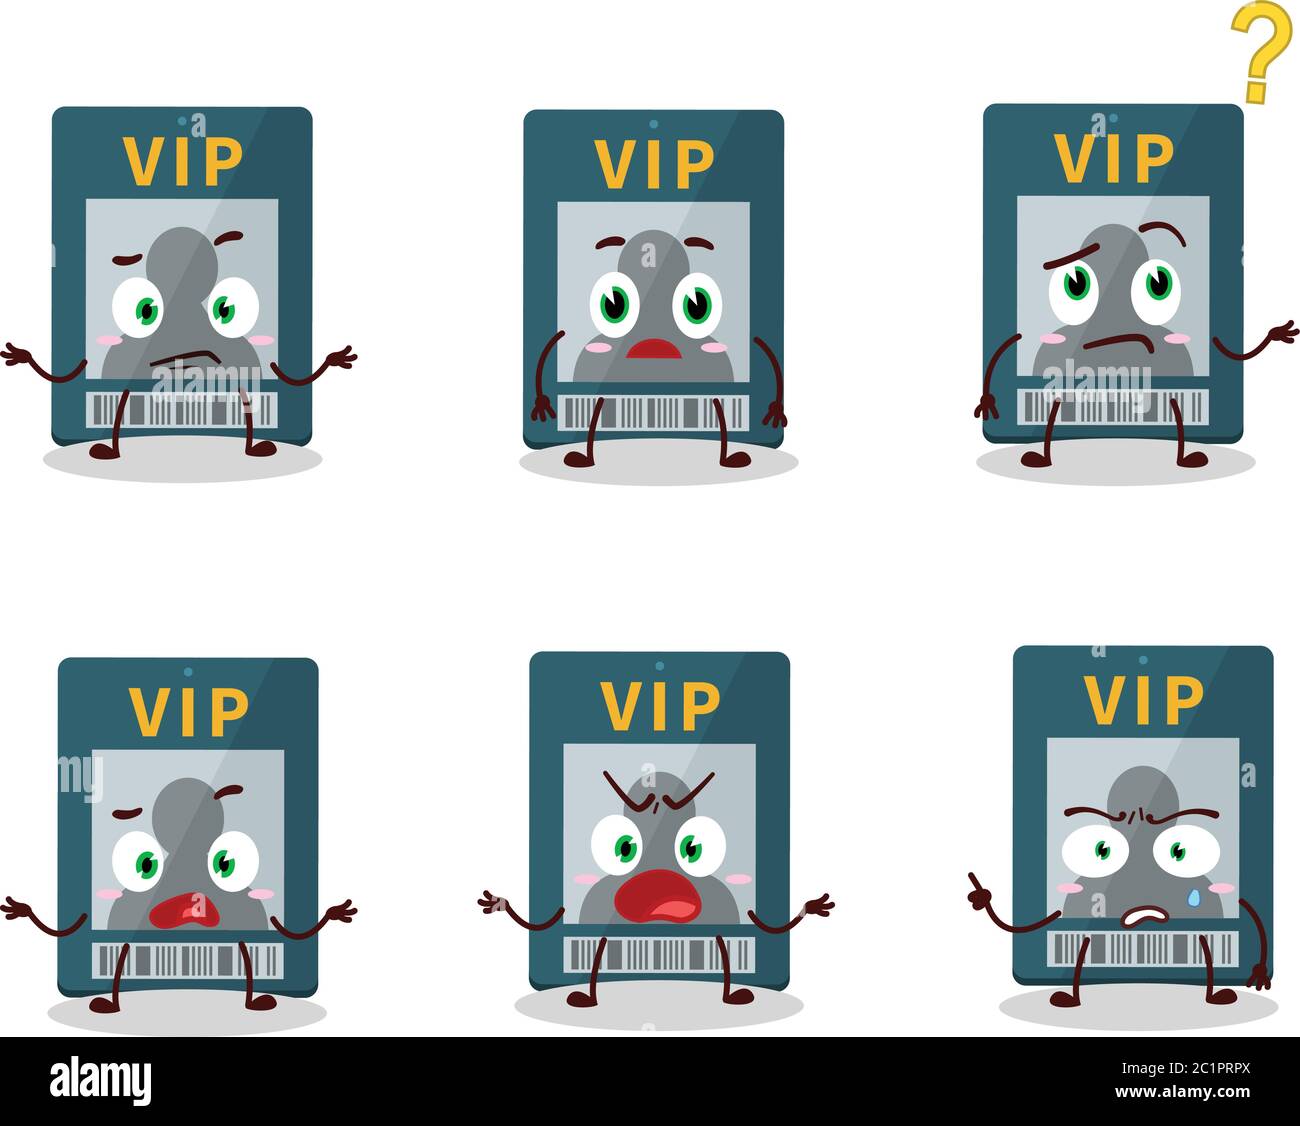 Cartoon character of vip card with what expression Stock Vector